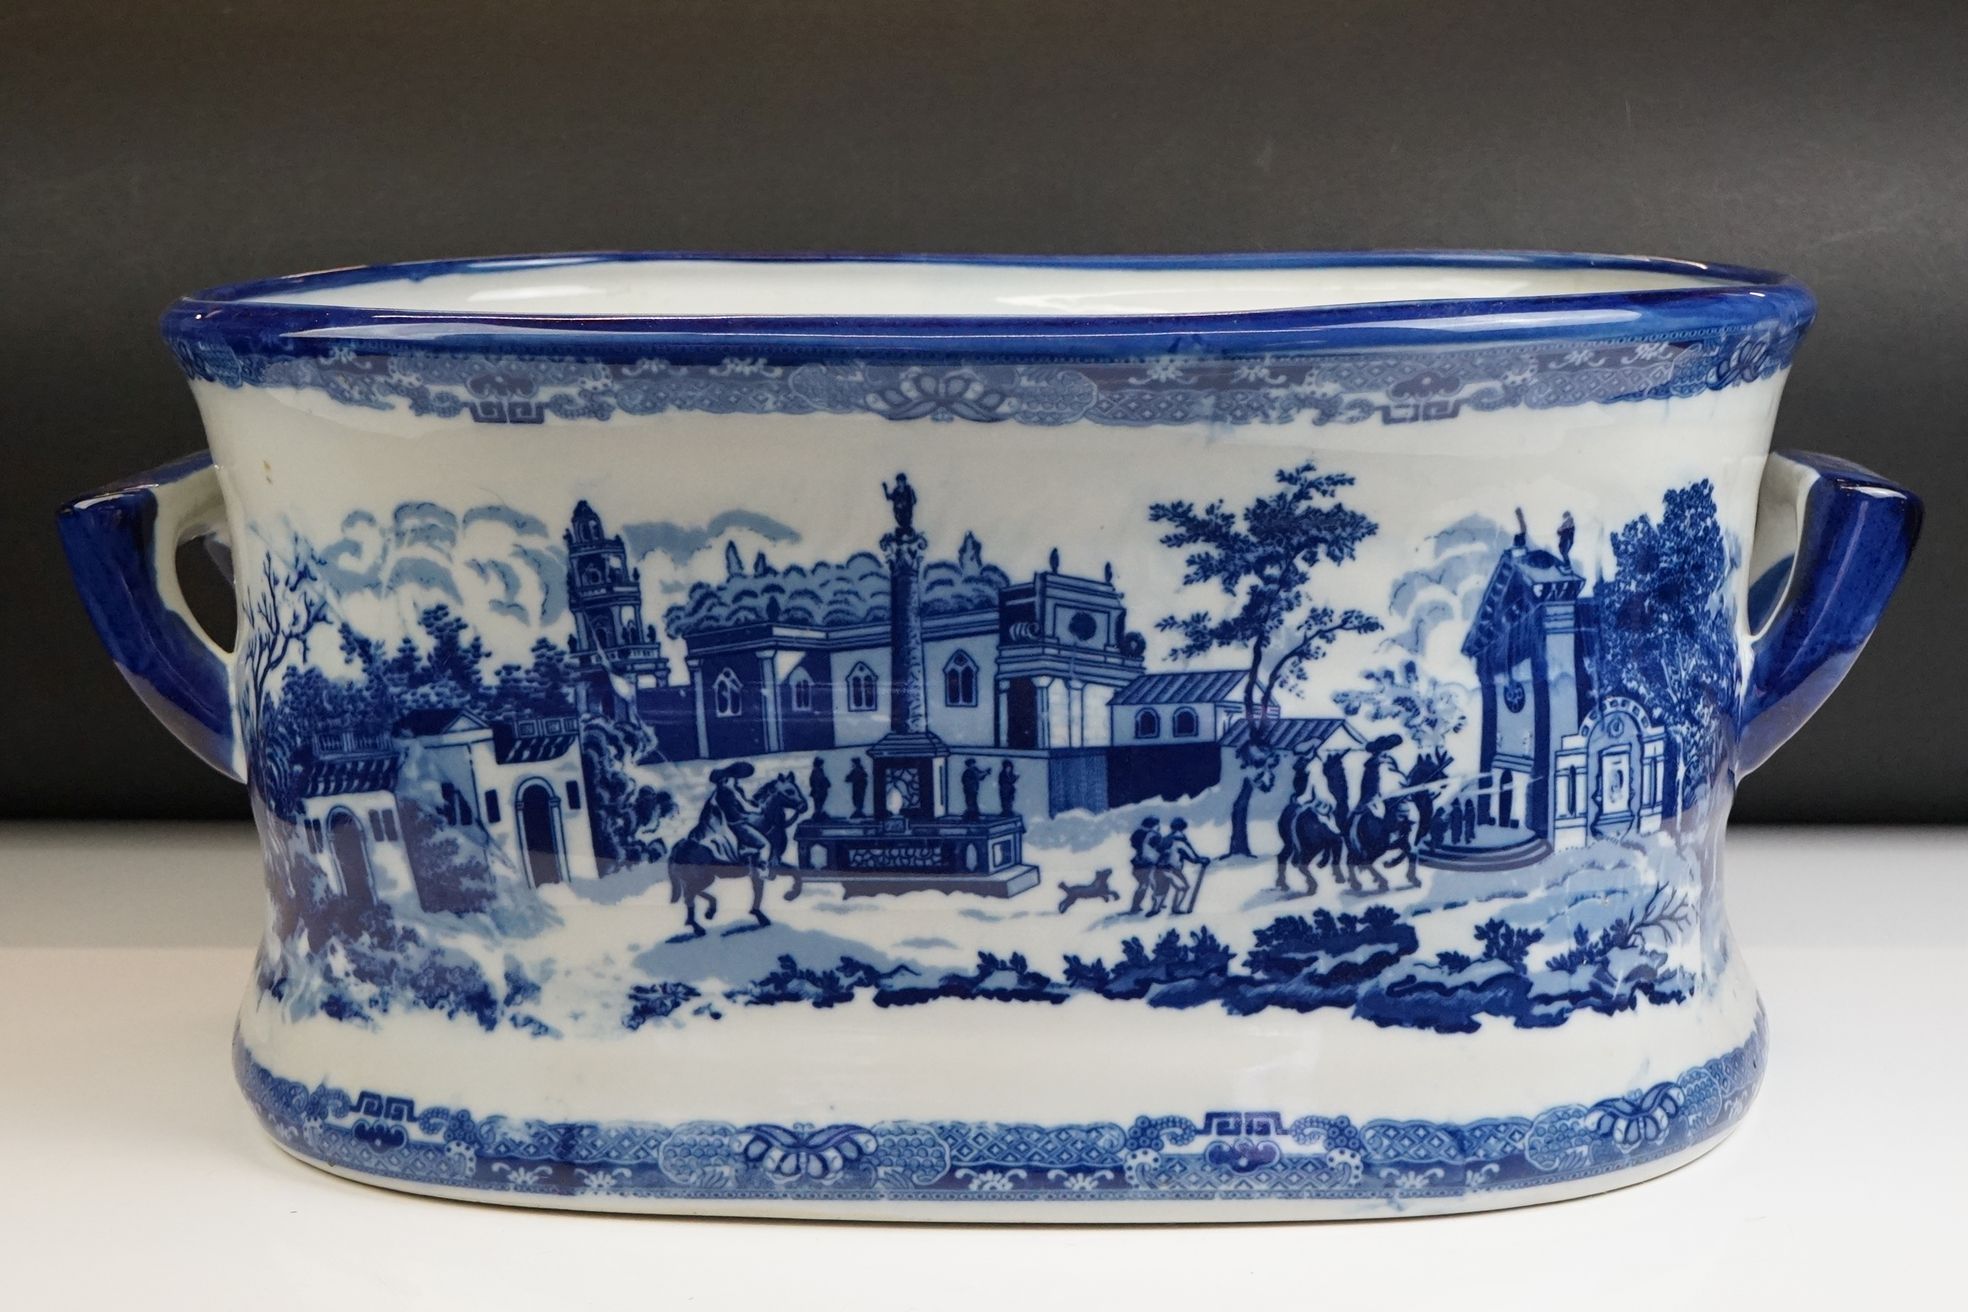 Blue & White Ironstone Foot Bath with typical transfer printed decoration, approximately 47cm wide - Image 9 of 10